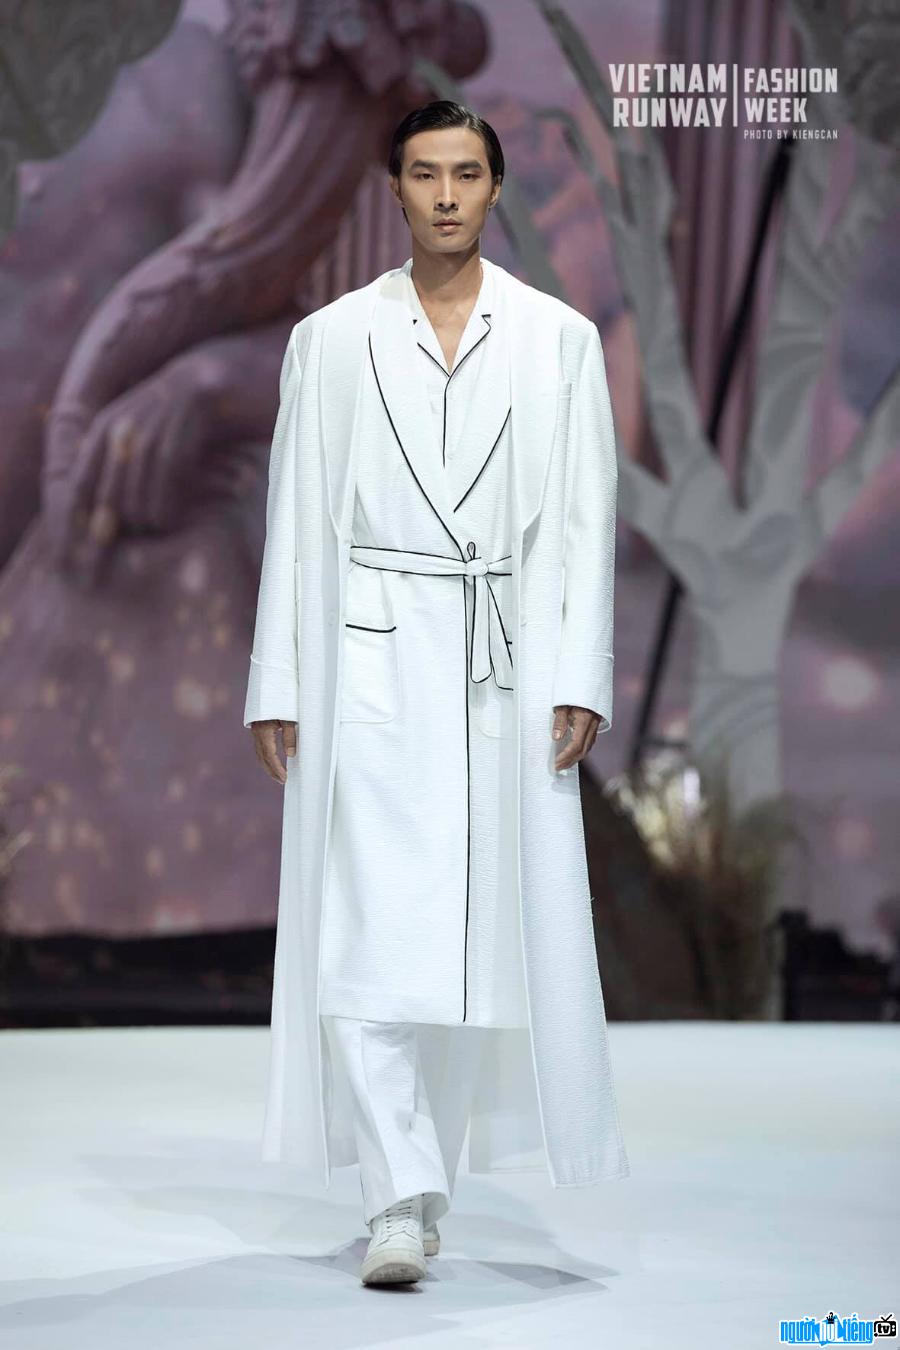  Image of confident Pham Cong Toan on the catwalk